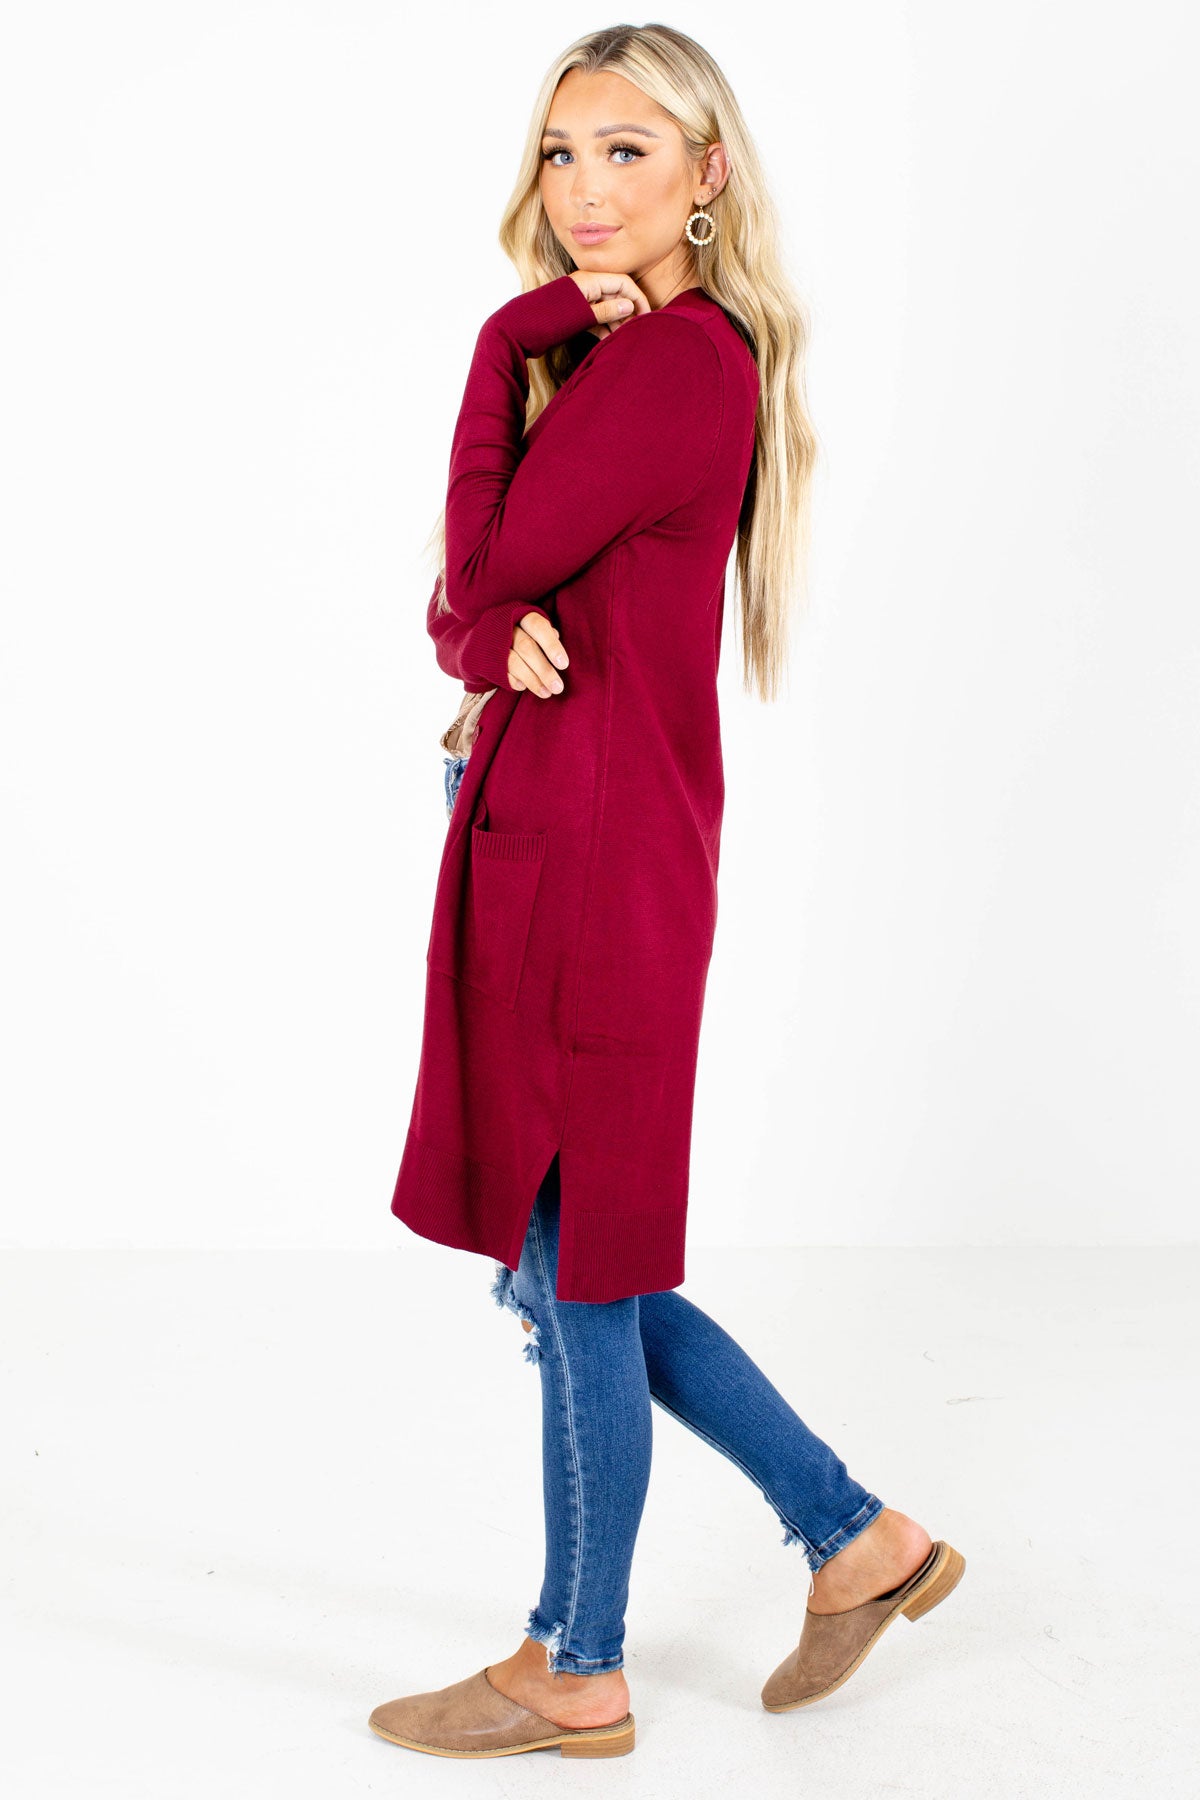 Long Cardigan with Pockets for Women in Burgundy